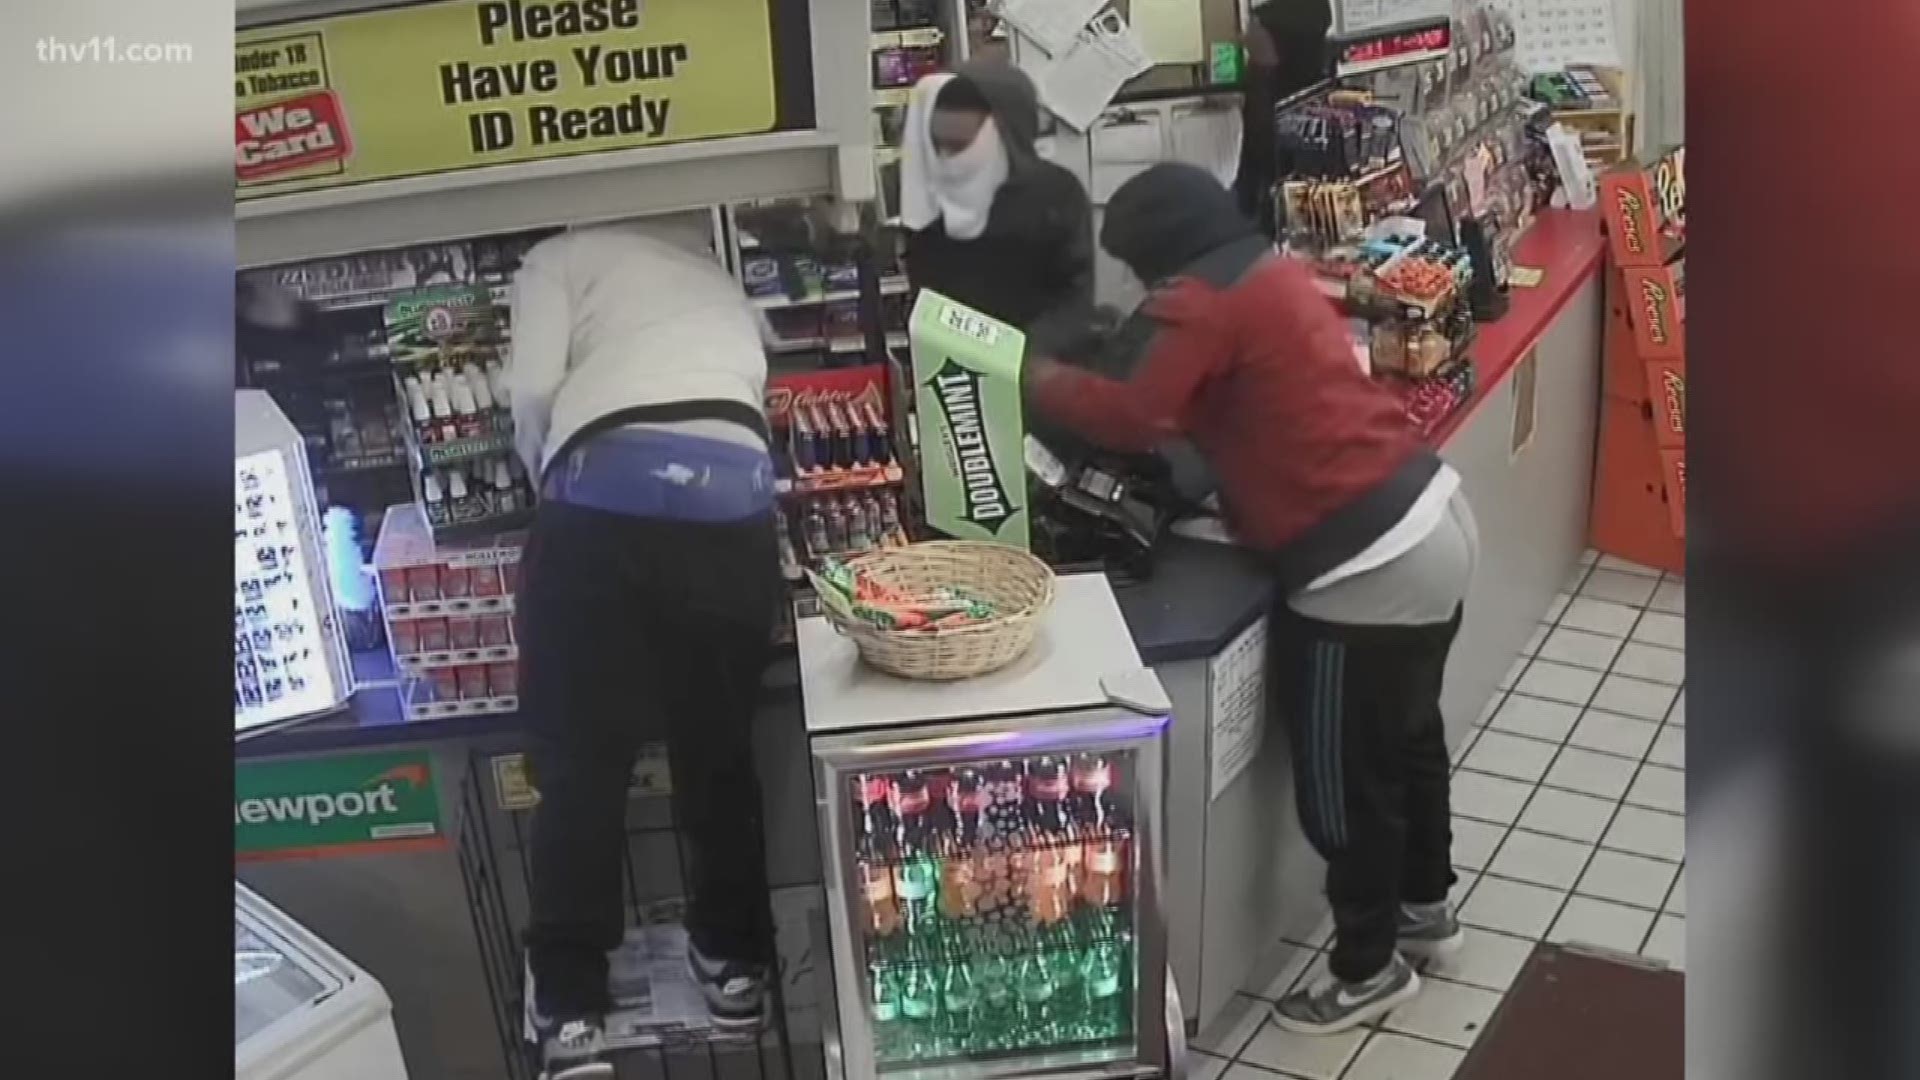 Jacksonville police are working to identify four suspects in an armed robbery.